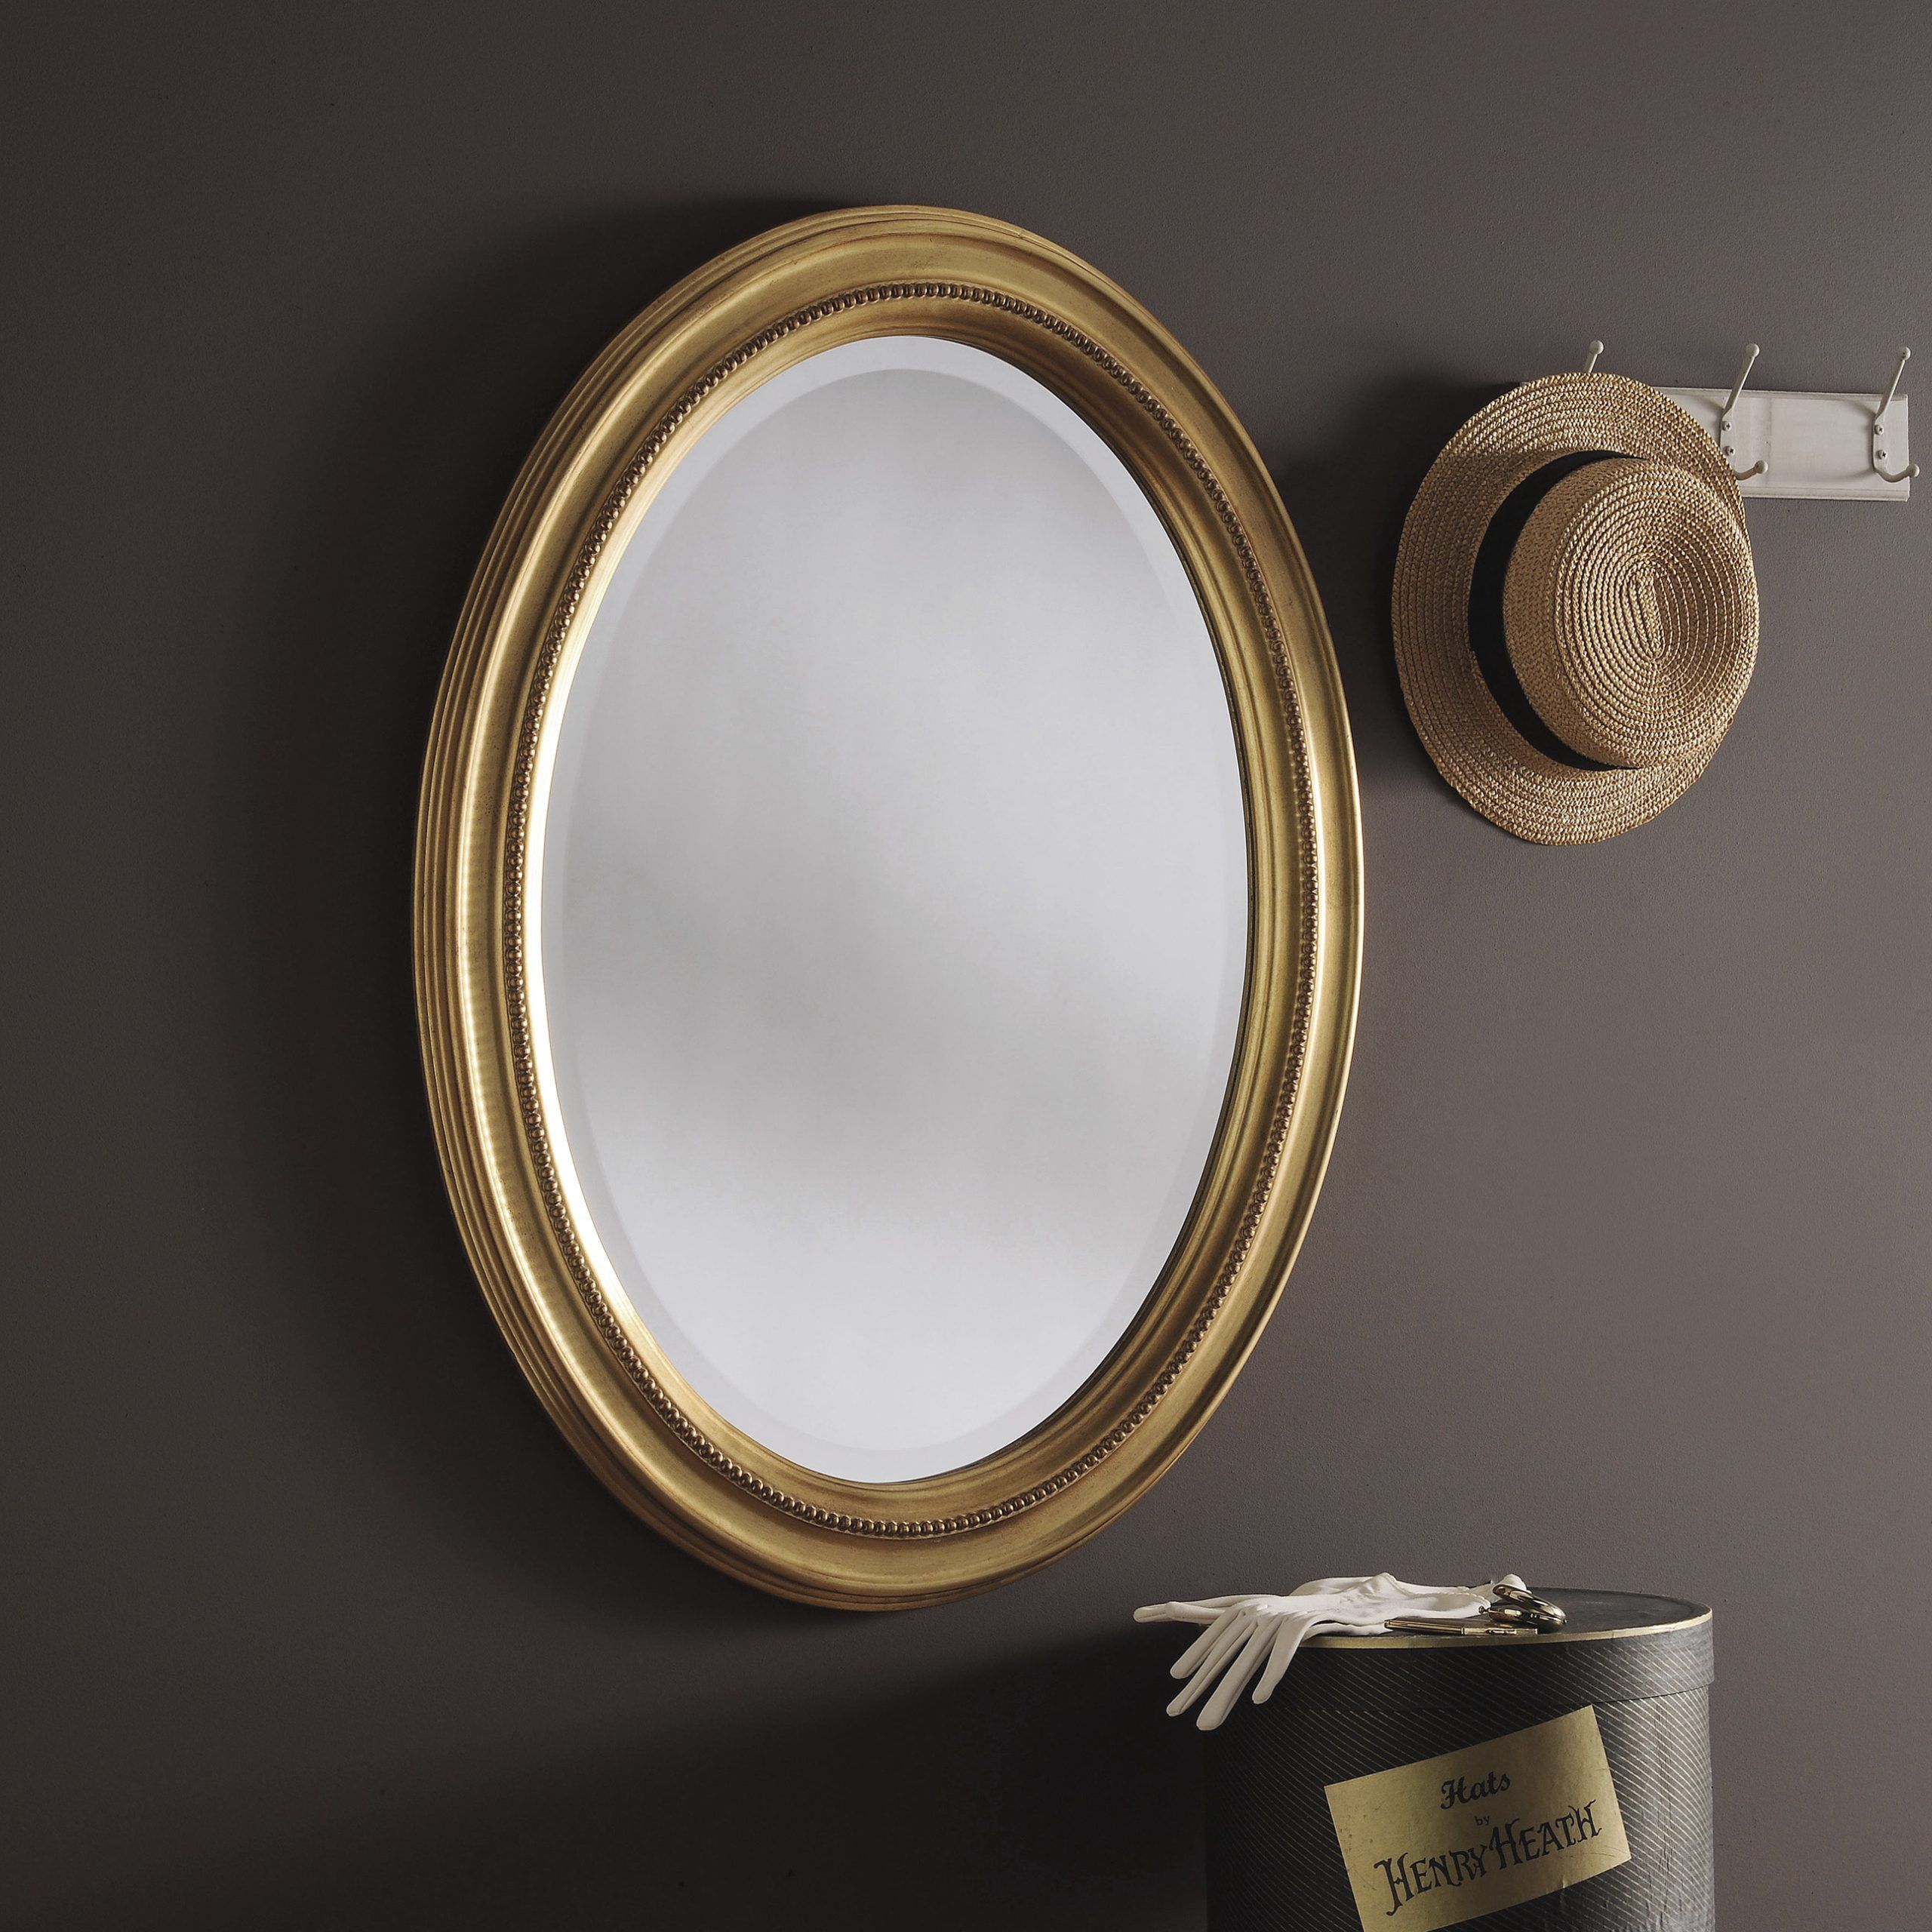 M319 Silver Leaf Oval Mirror Beaded Frame Suitable For Hallway Pertaining To Glam Silver Leaf Beaded Wall Mirrors (View 15 of 15)